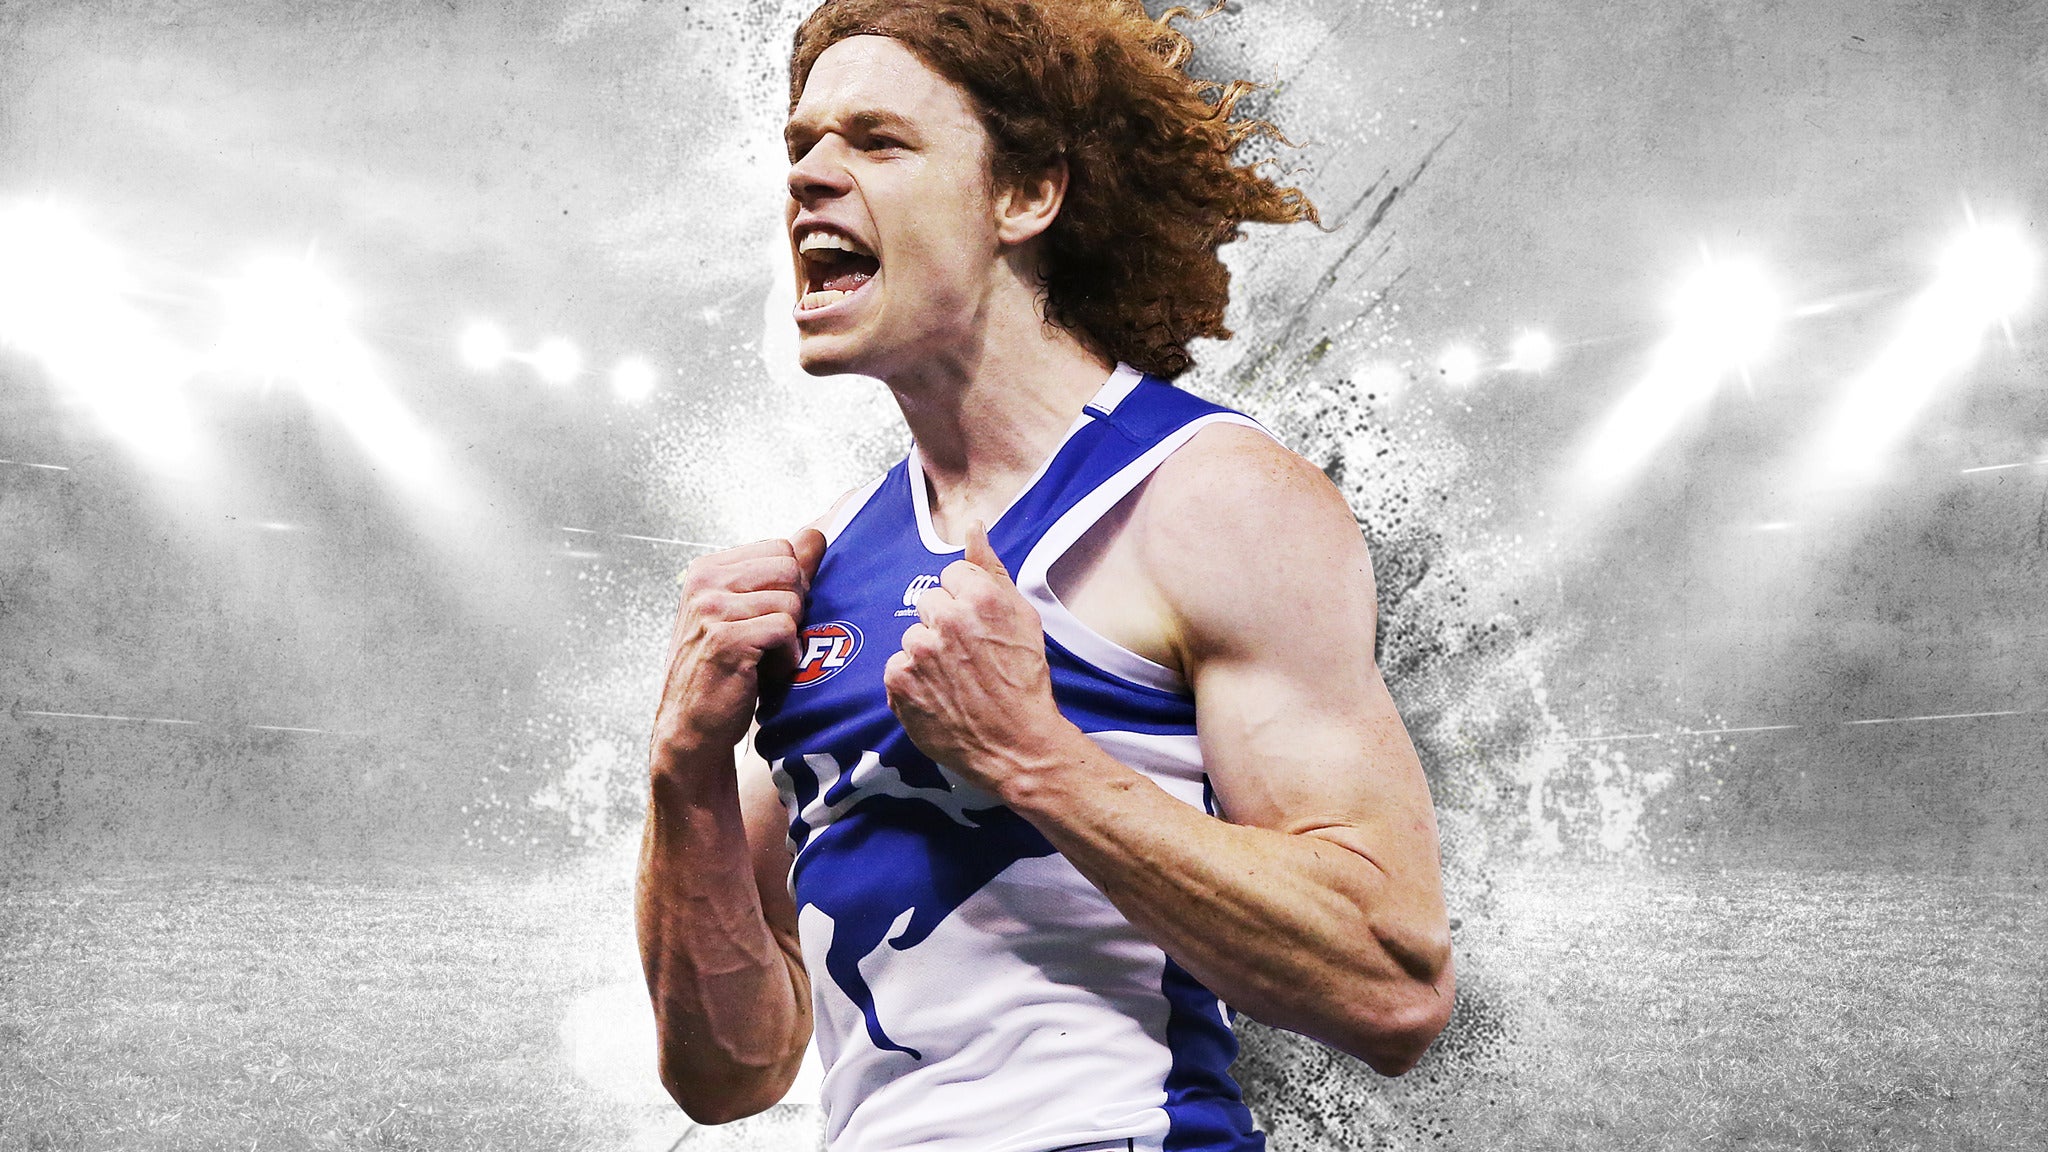 Image used with permission from Ticketmaster | North Melbourne v Hawthorn tickets